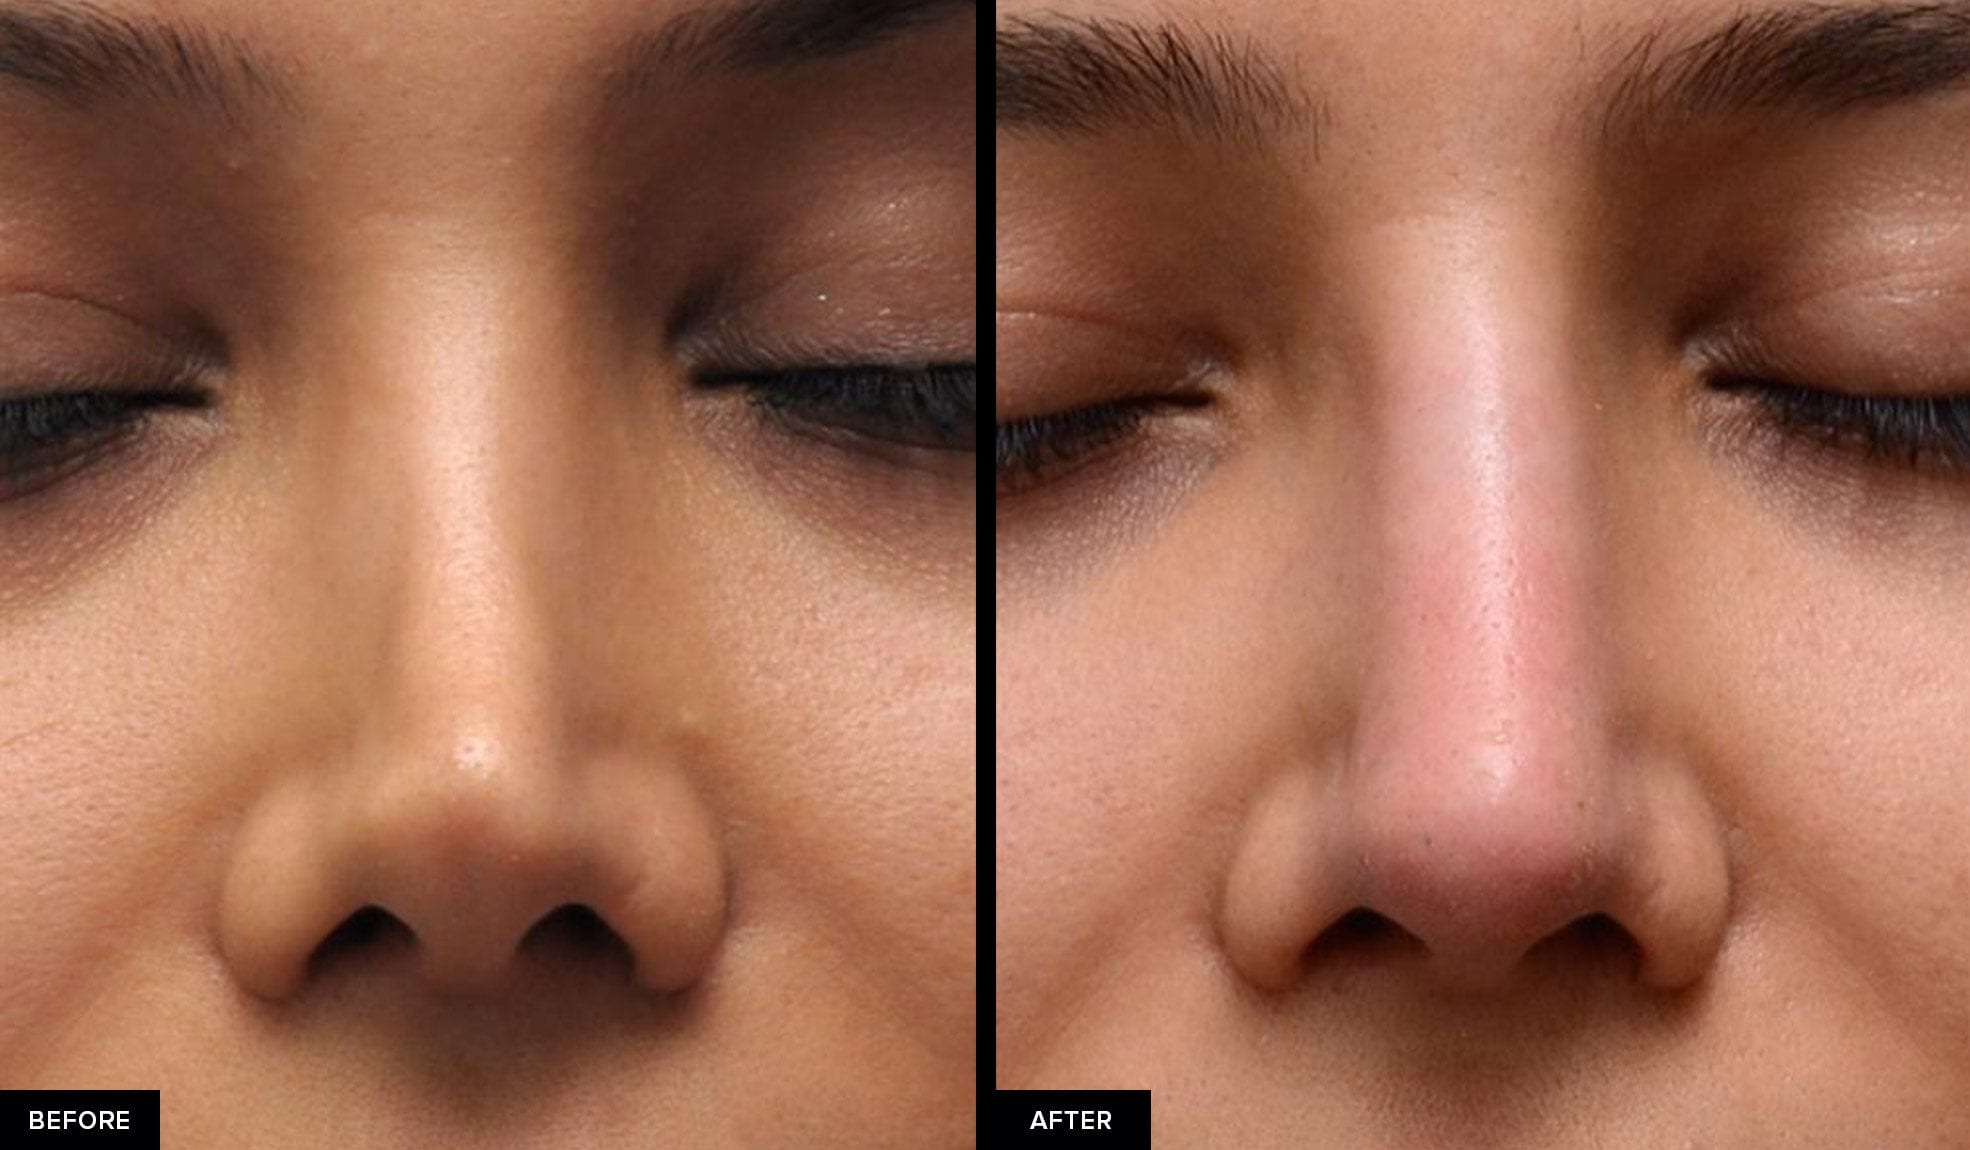 bad rhinoplasty before and after